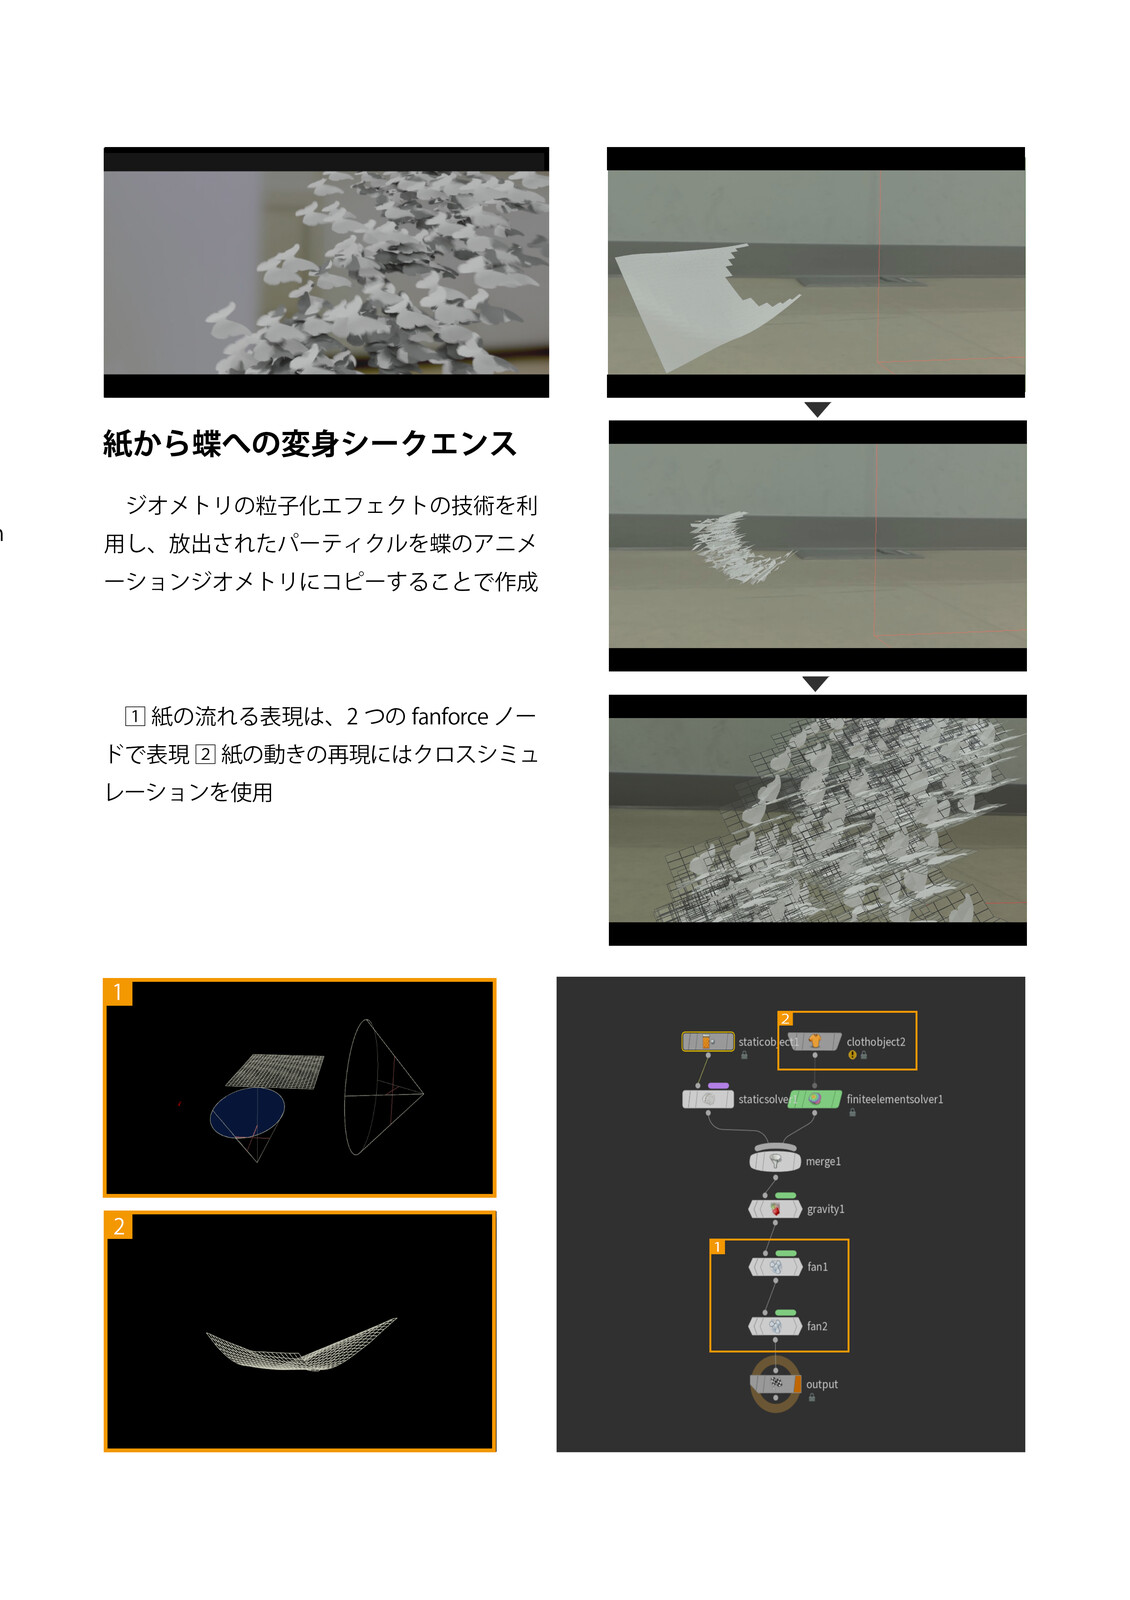 Making of paper sim and butterfly effect